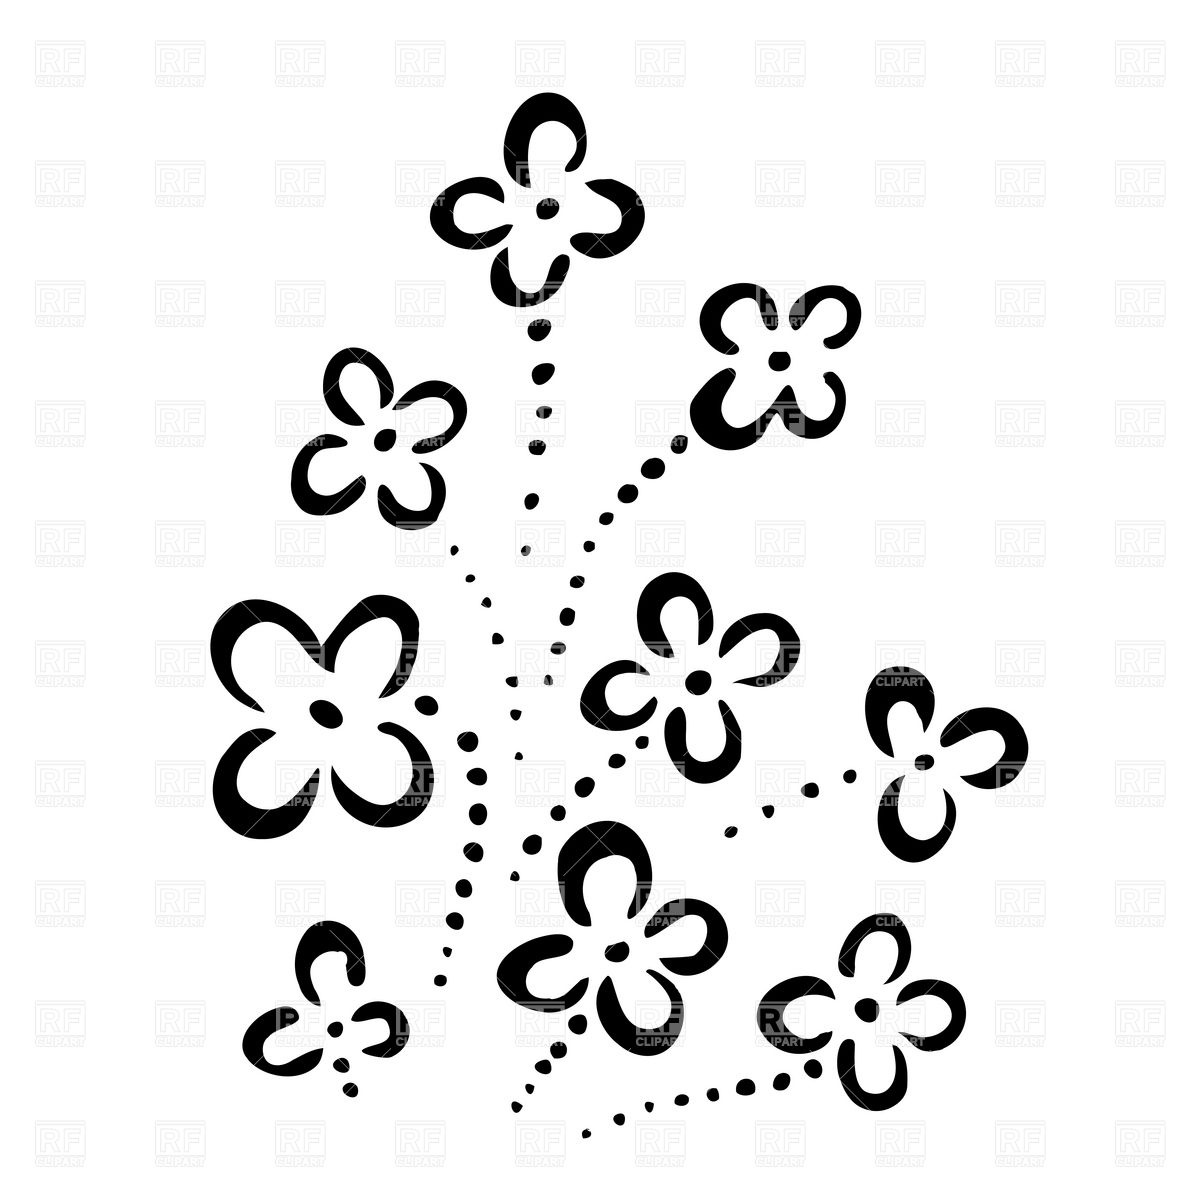 11 Simple Flower Vector Floral Design Images Flower Vector Free Download Simple Vector Flower Patterns And Simple Flower Designs Drawings Newdesignfile Com